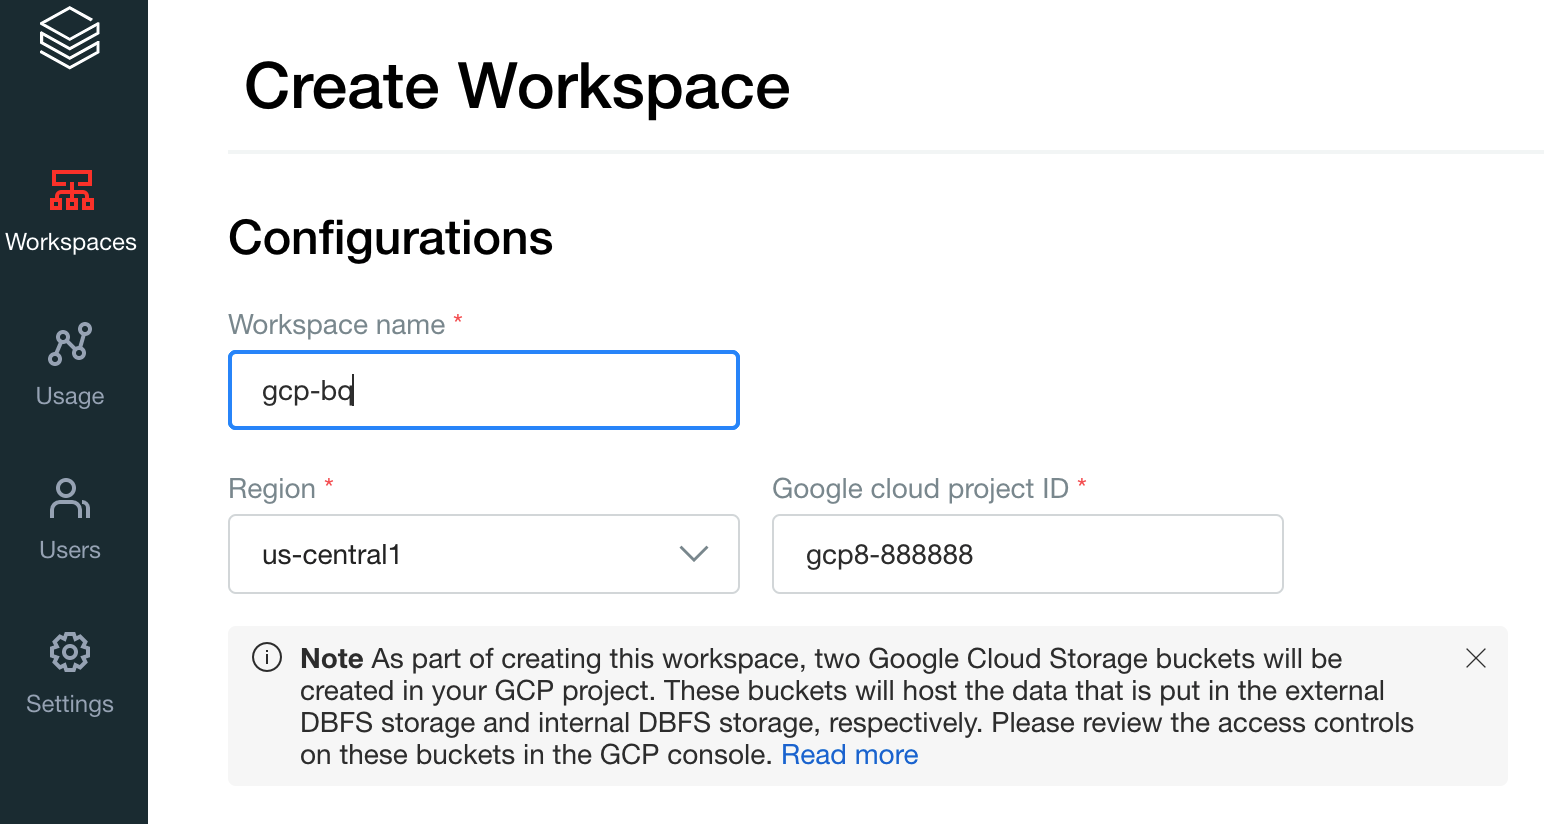 Create Workspace screen with Workspace name, region and Google Cloud
project ID